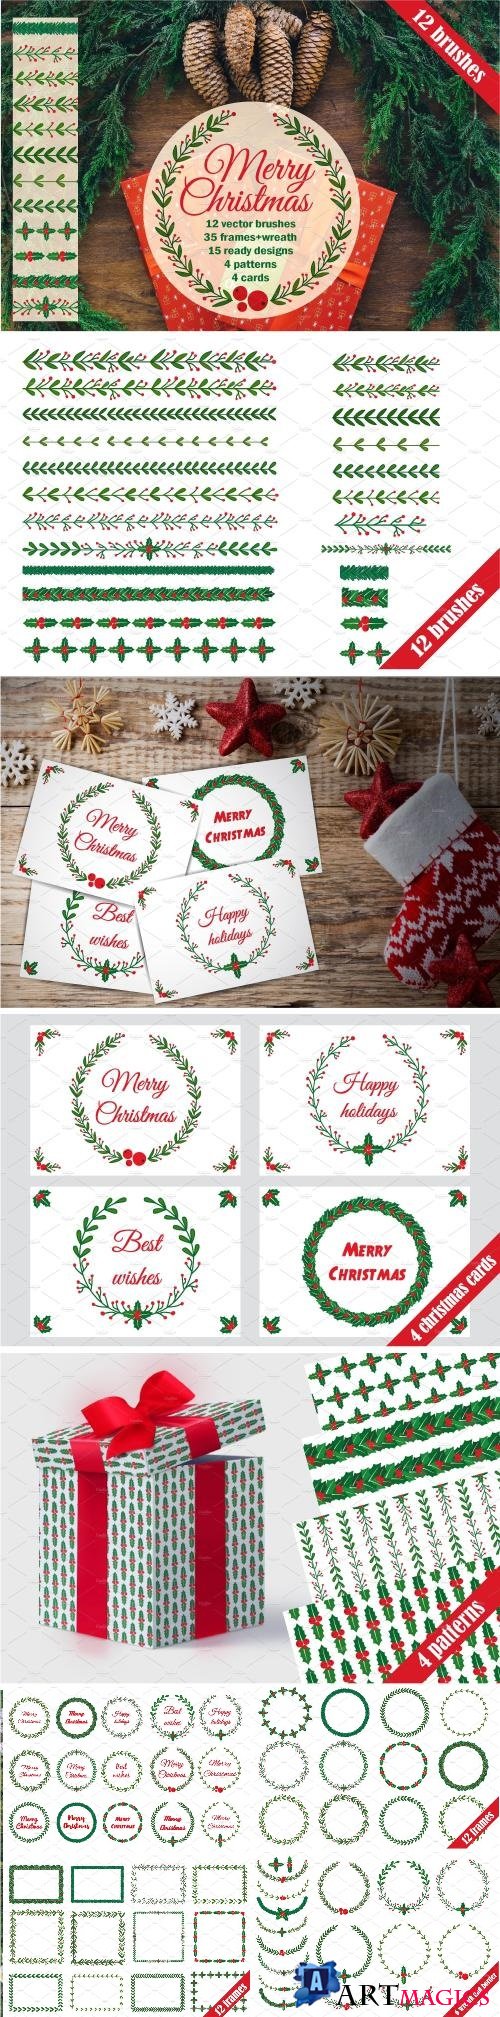 Christmas wreath and brushes - 2046638